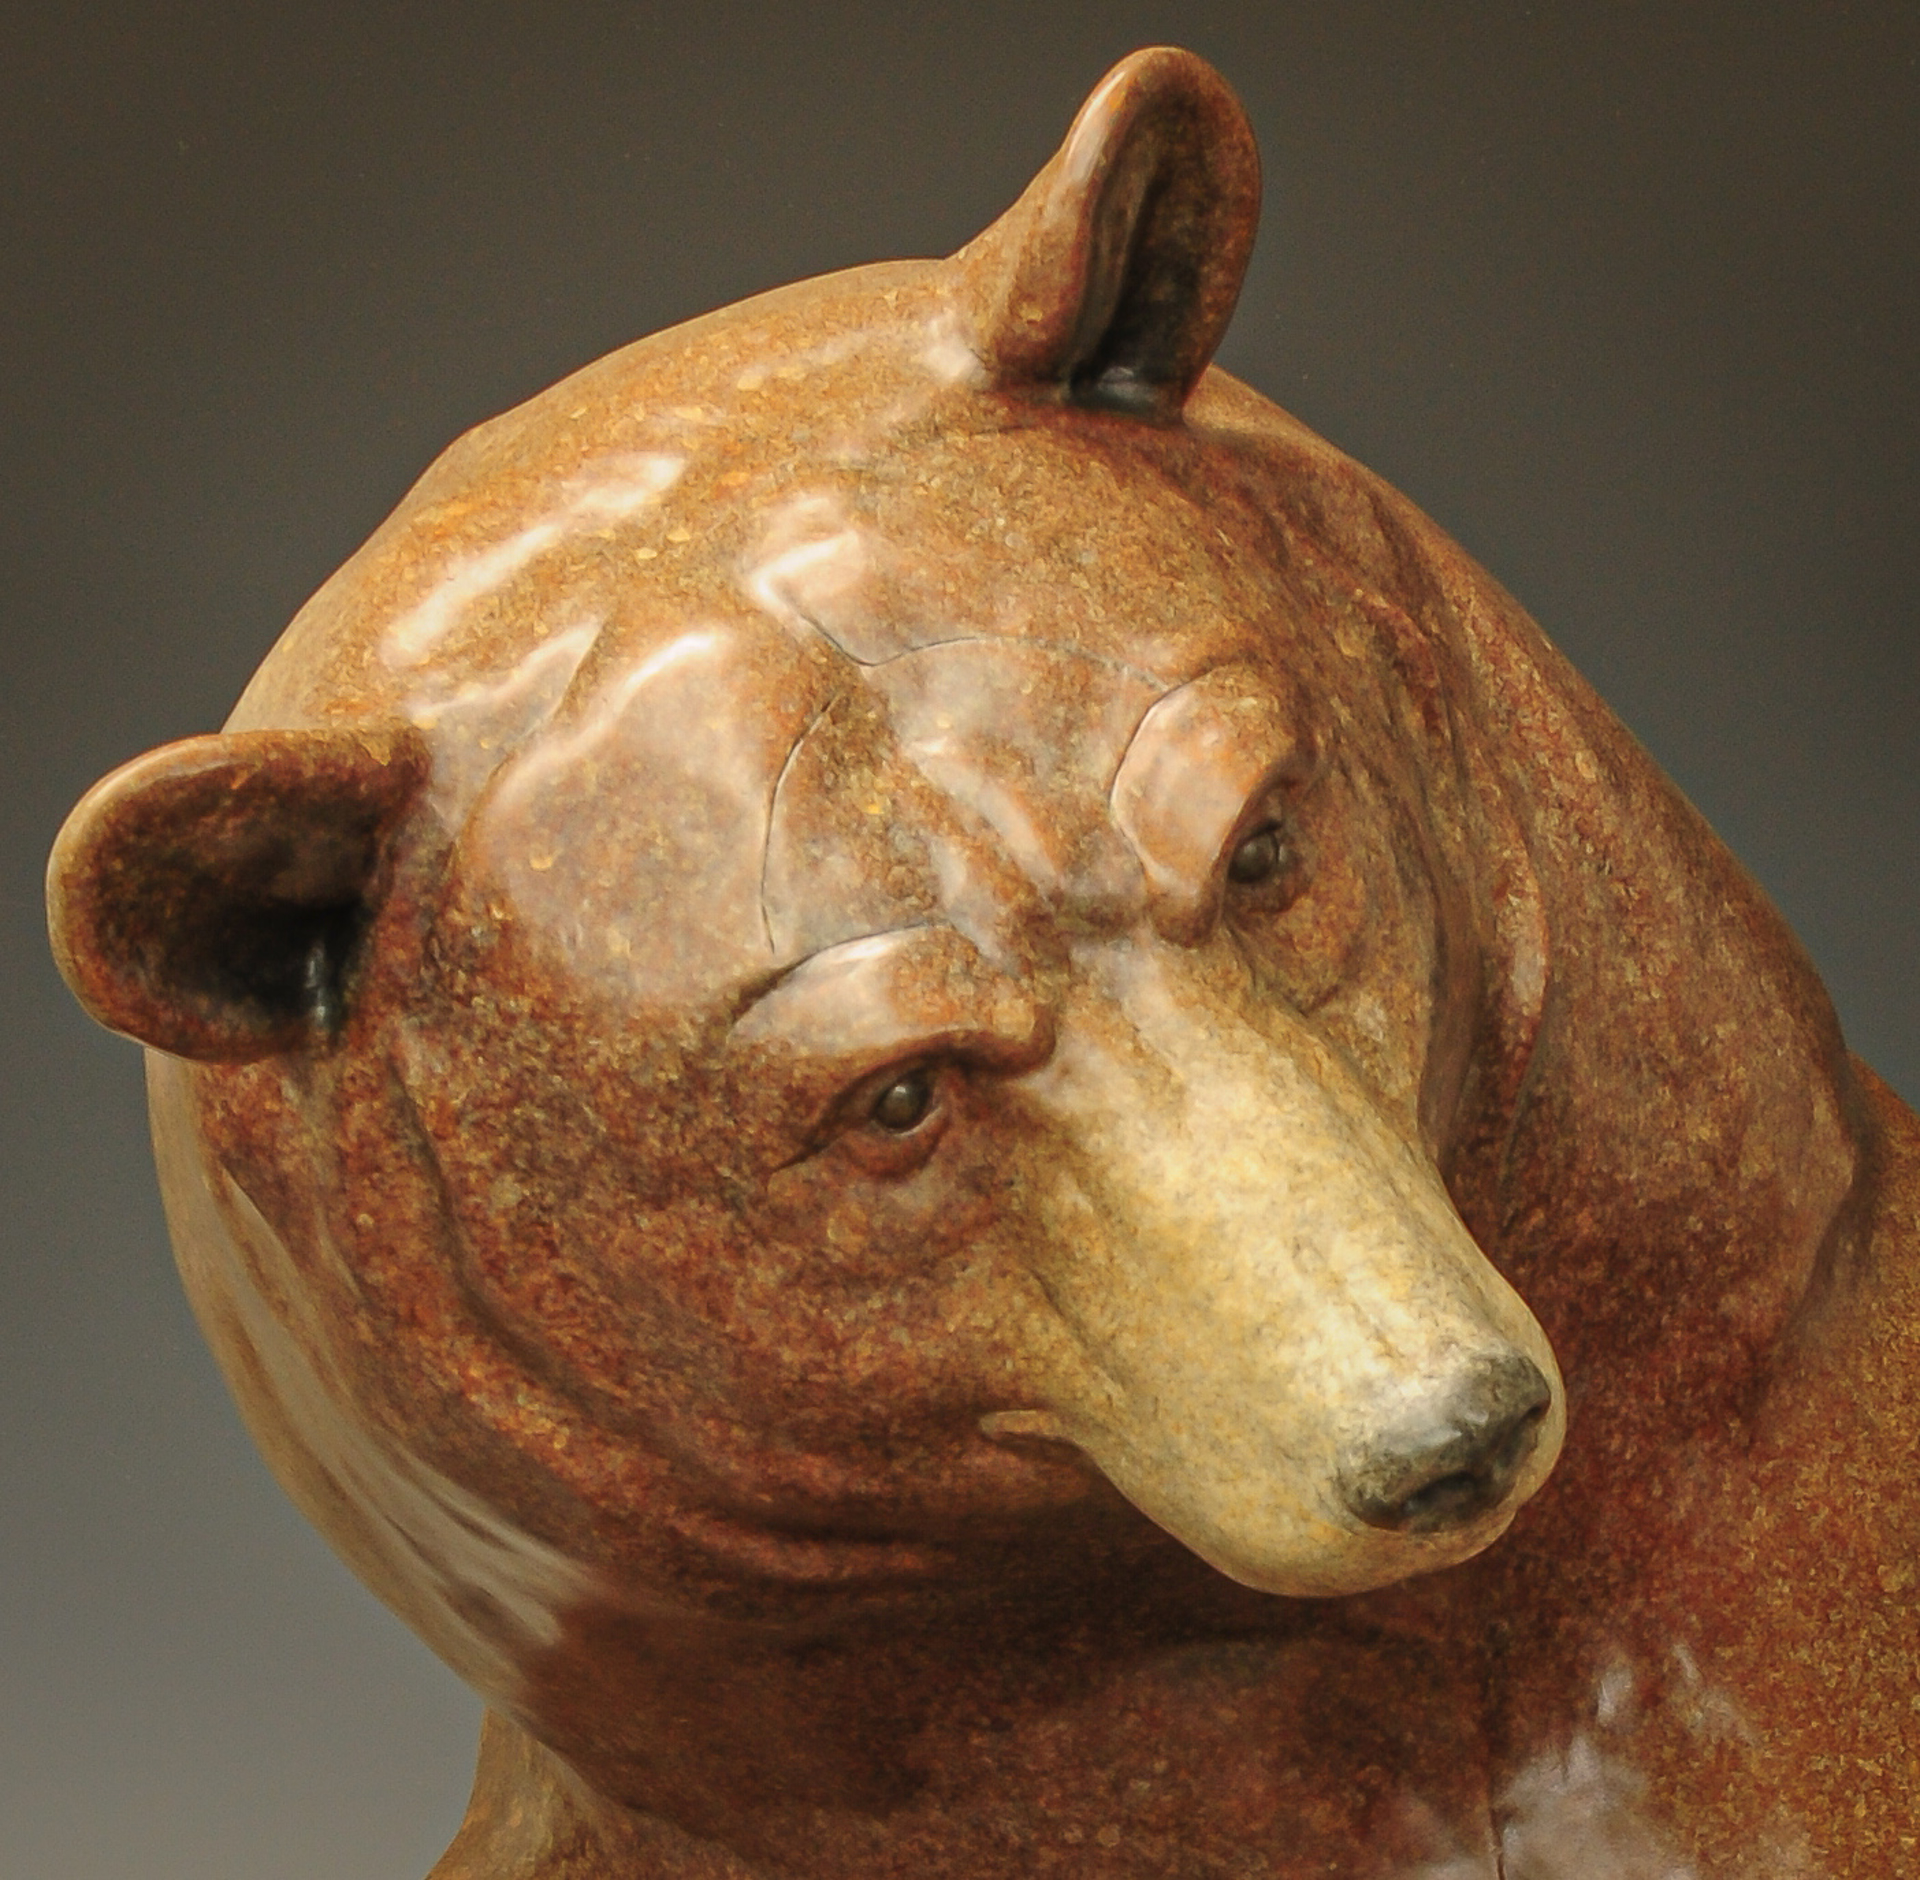 A Fine Art Sculpture In Bronze By Jeremy Bradshaw Featuring A Sitting Bear, Available At Gallery Wild